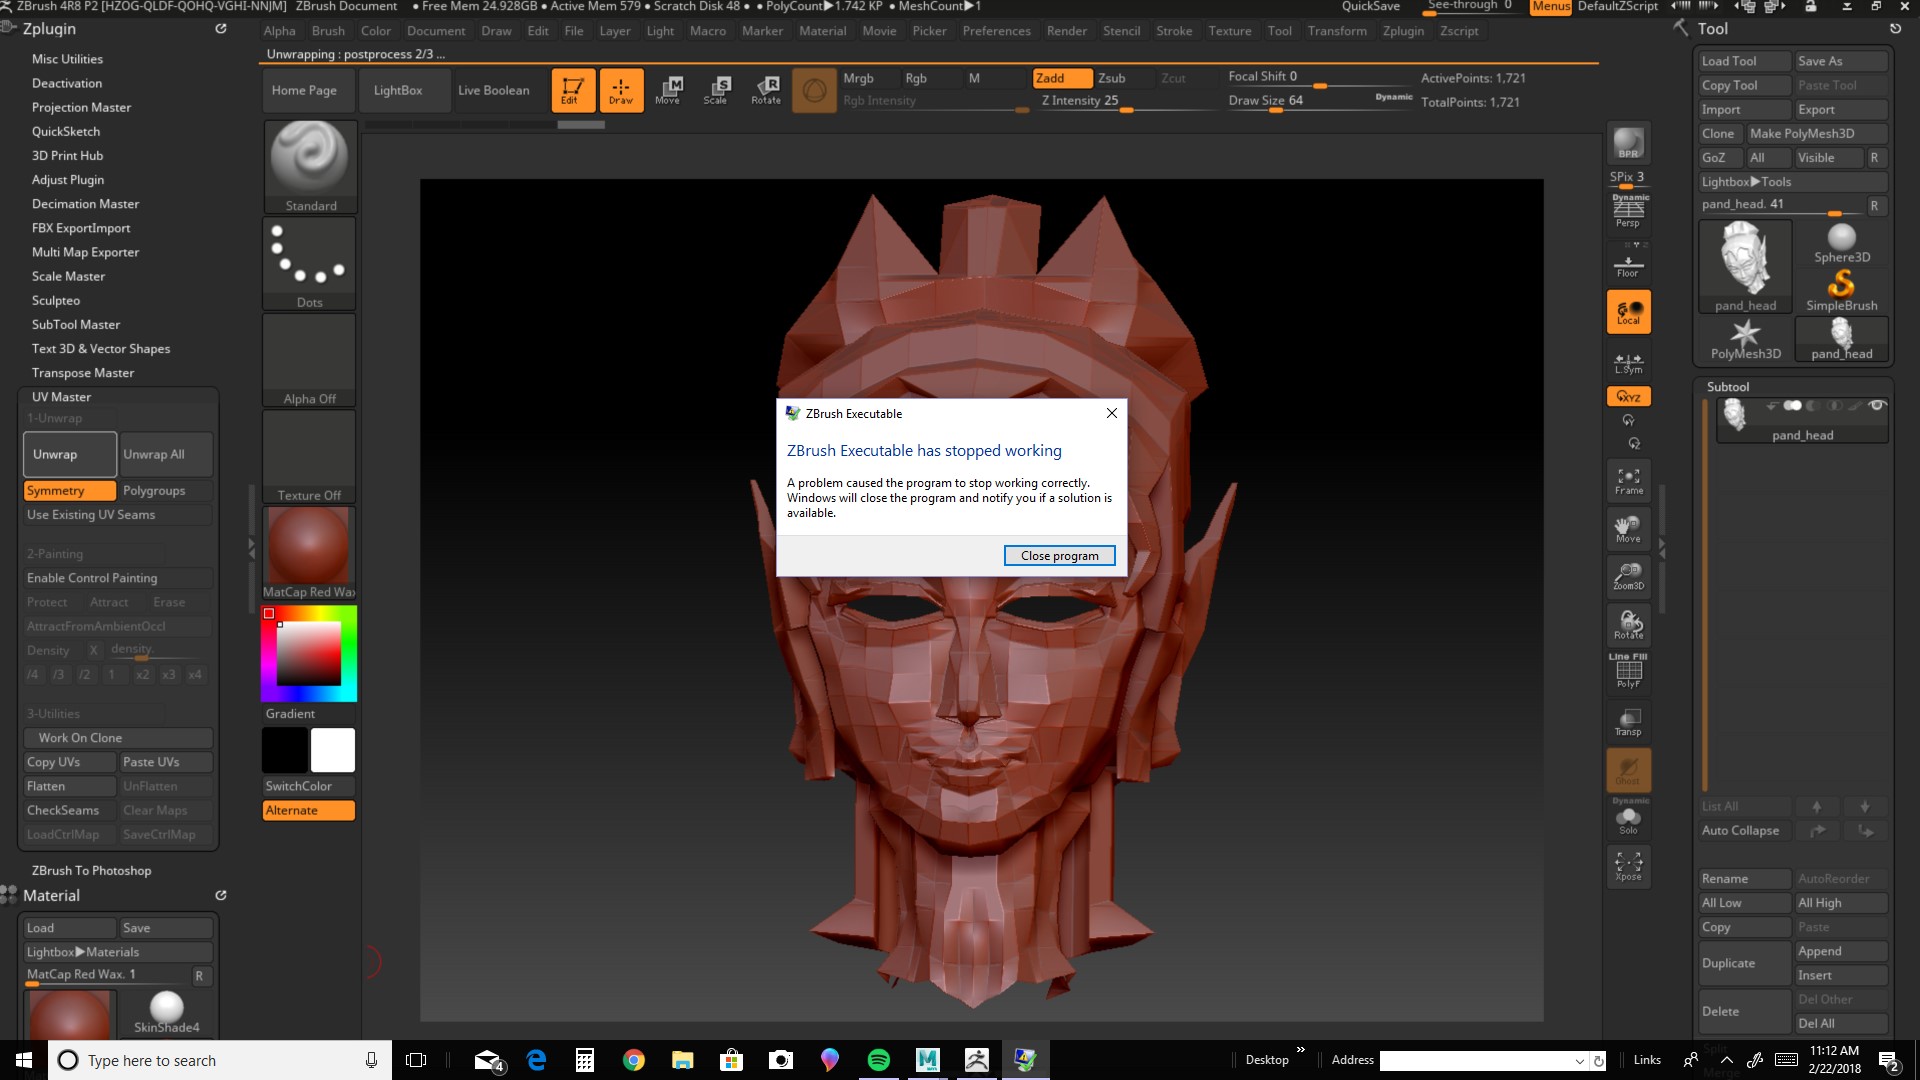 the most recent zbrush session was abnormally terminated